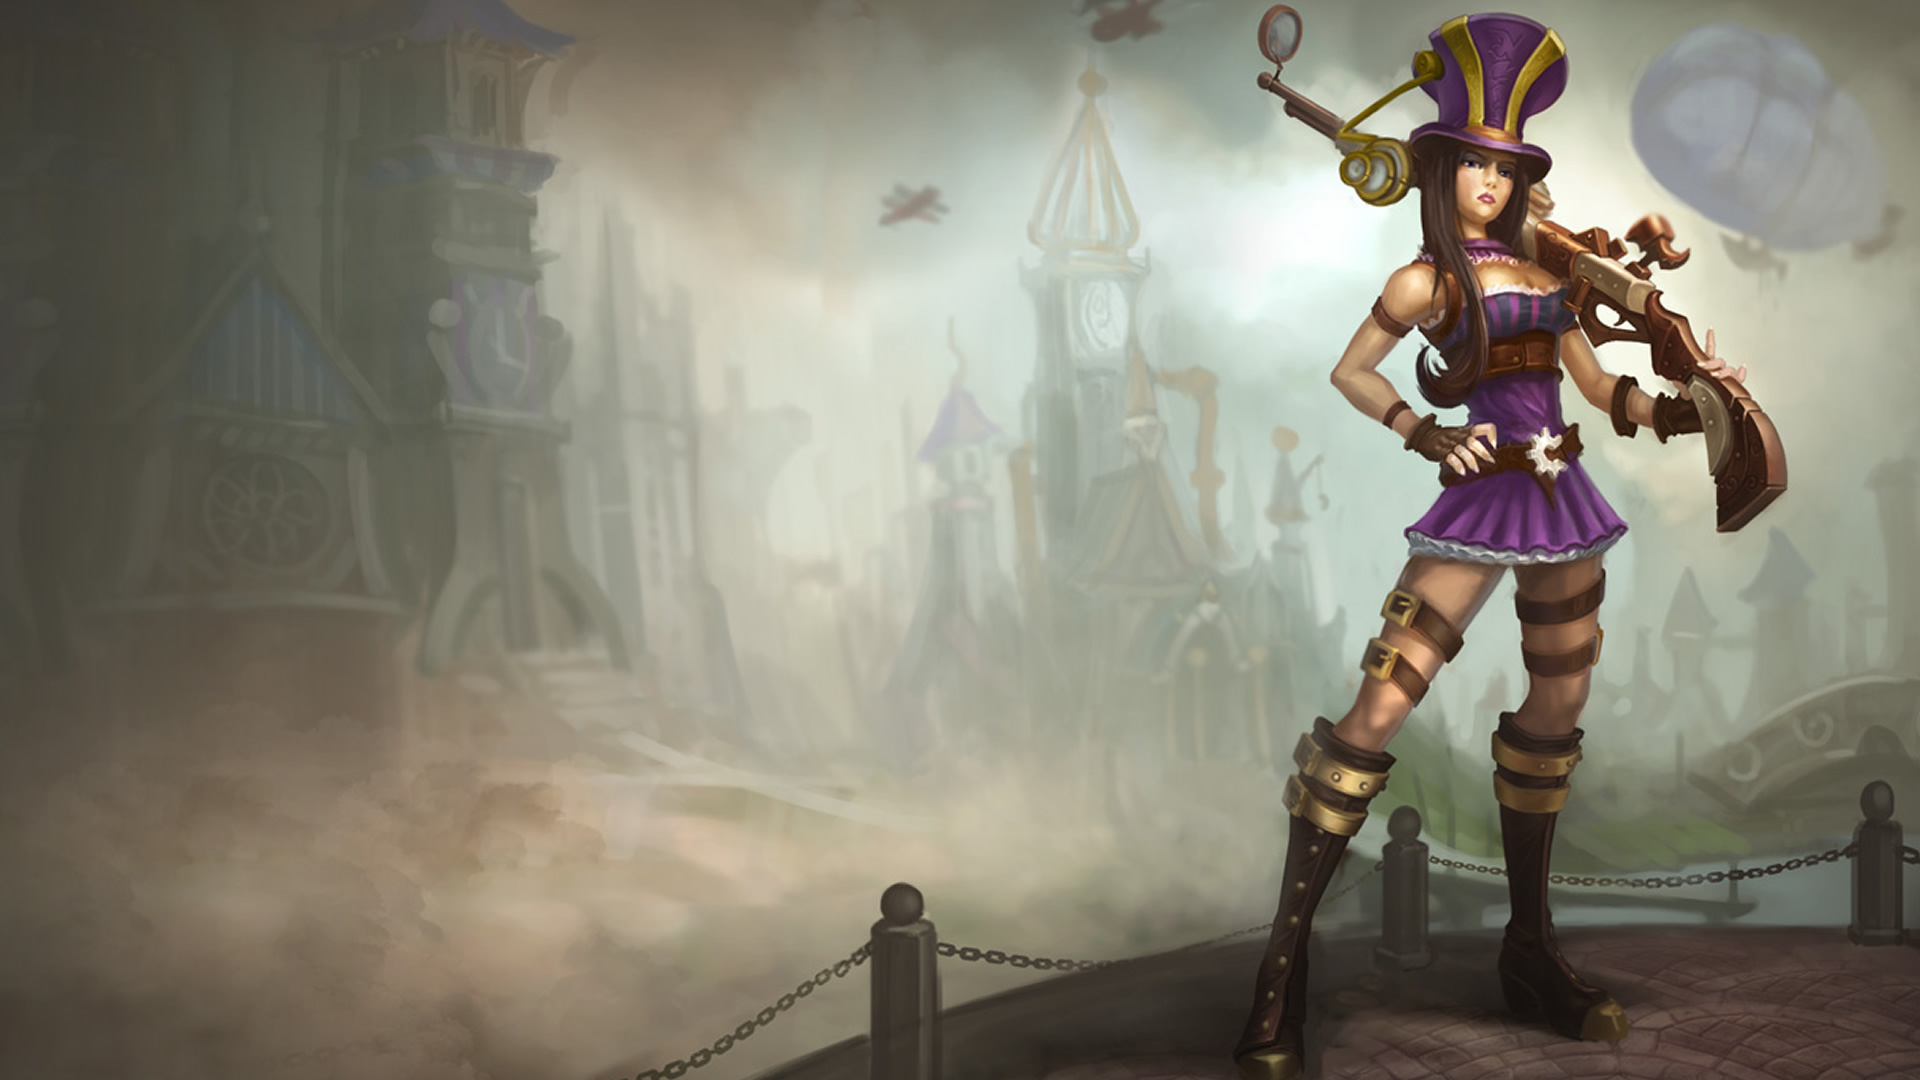 General 1920x1080 Caitlyn (League of Legends) League of Legends sniper rifle girls with guns steampunk video game characters